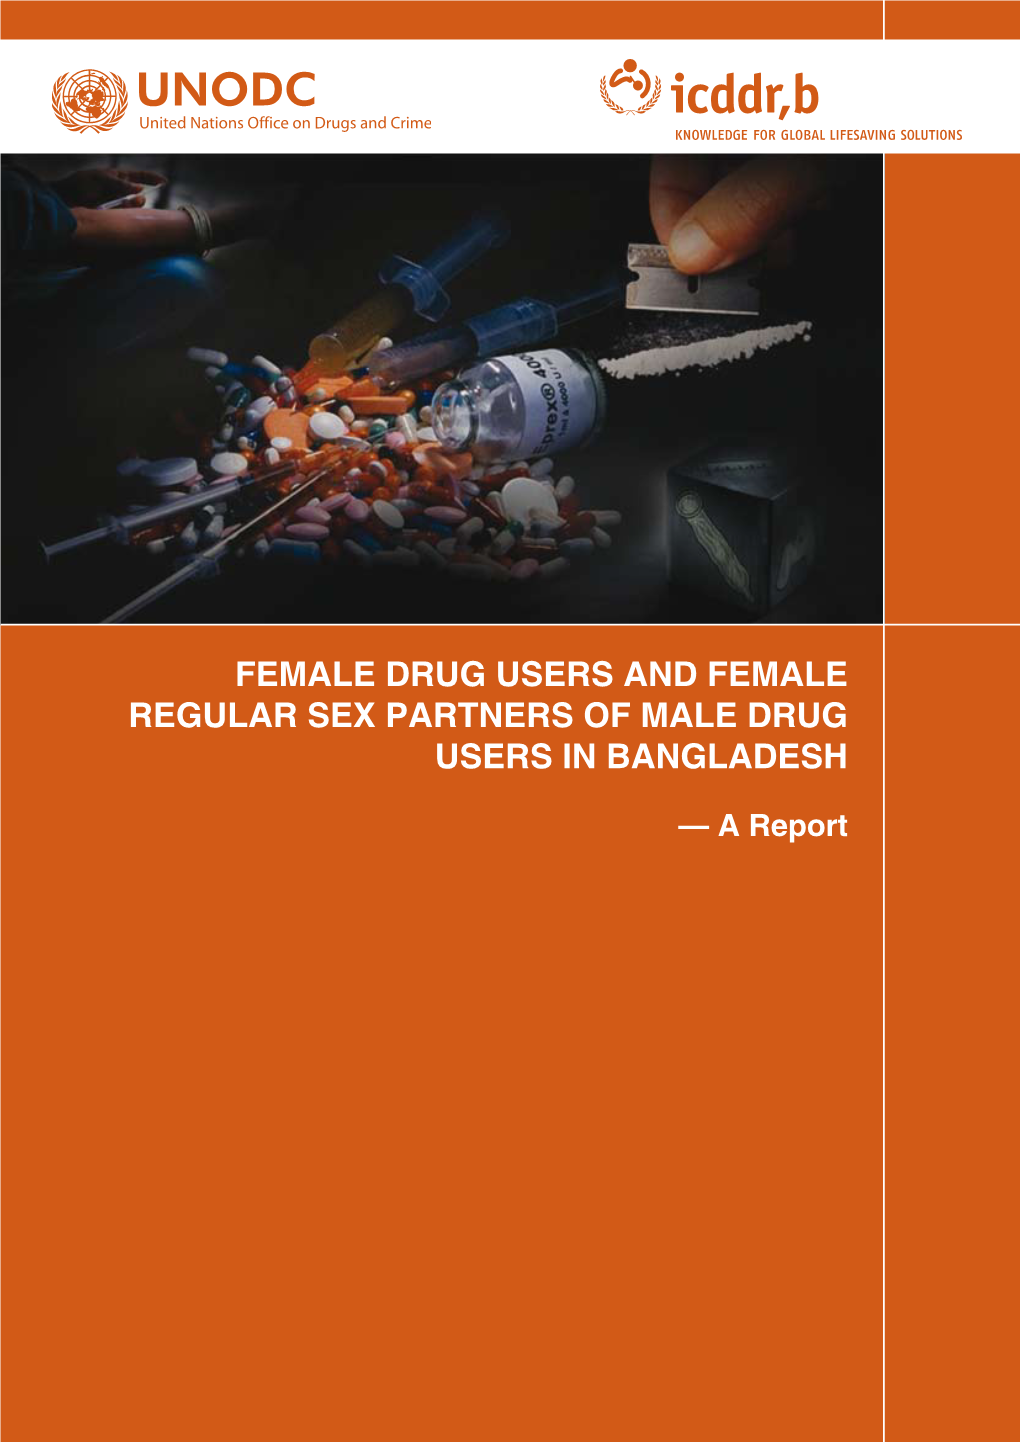 Female Drug Users and Female Regular Sex Partners of Male Drug Users in Bangladesh